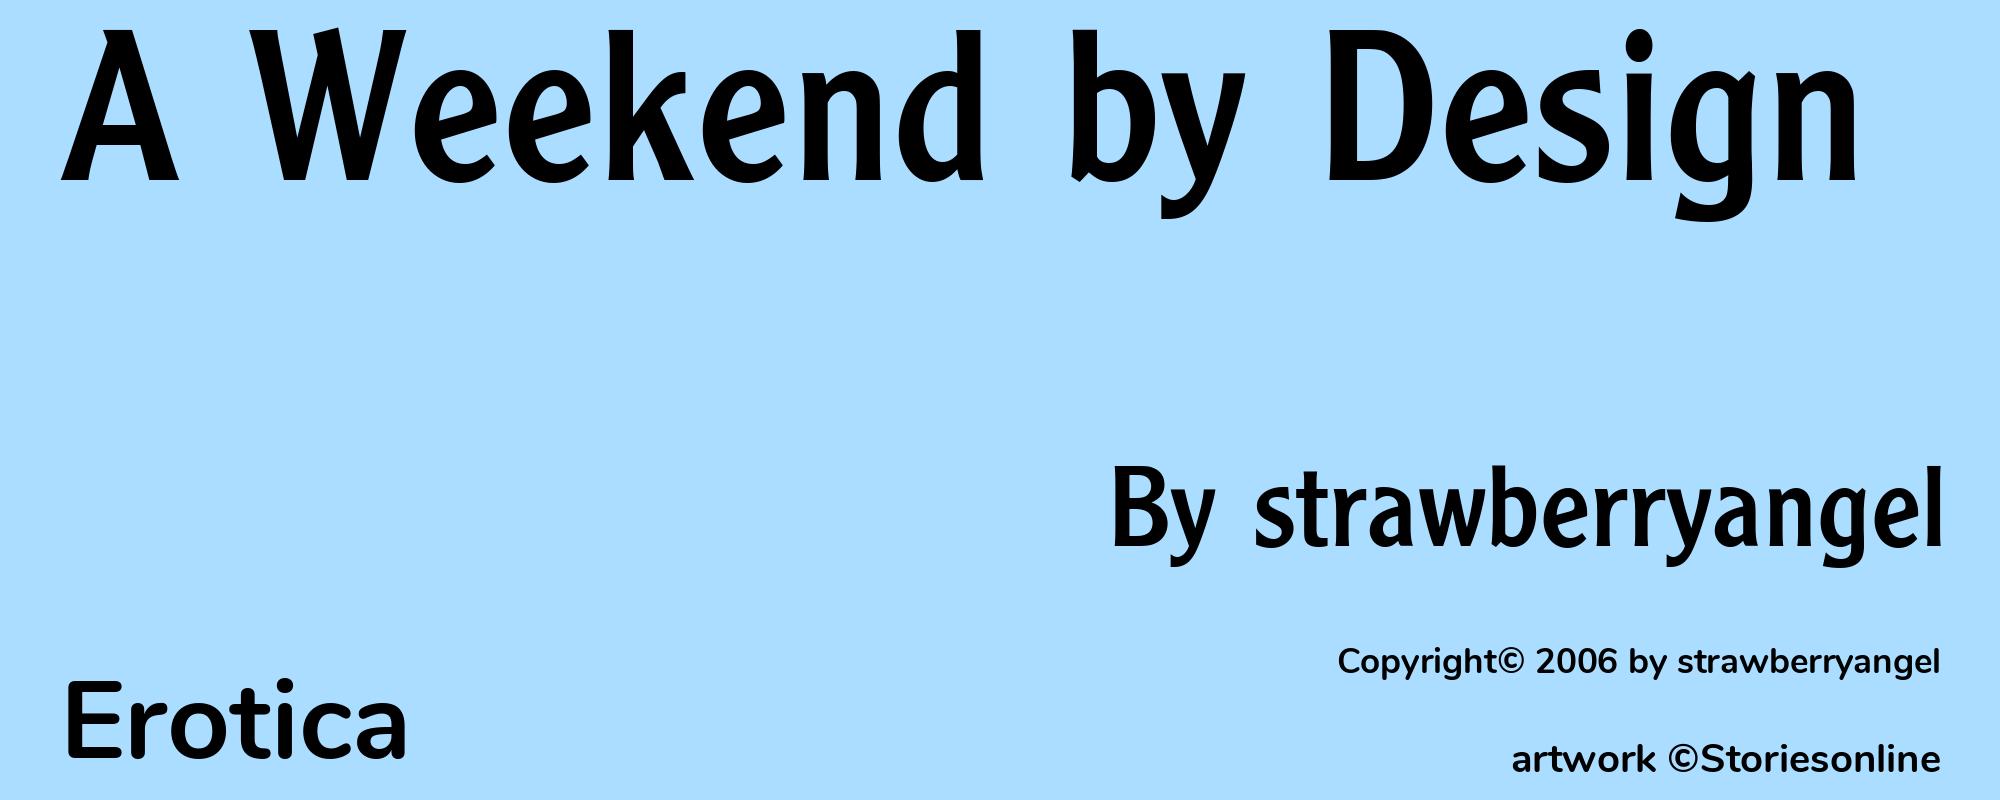 A Weekend by Design - Cover